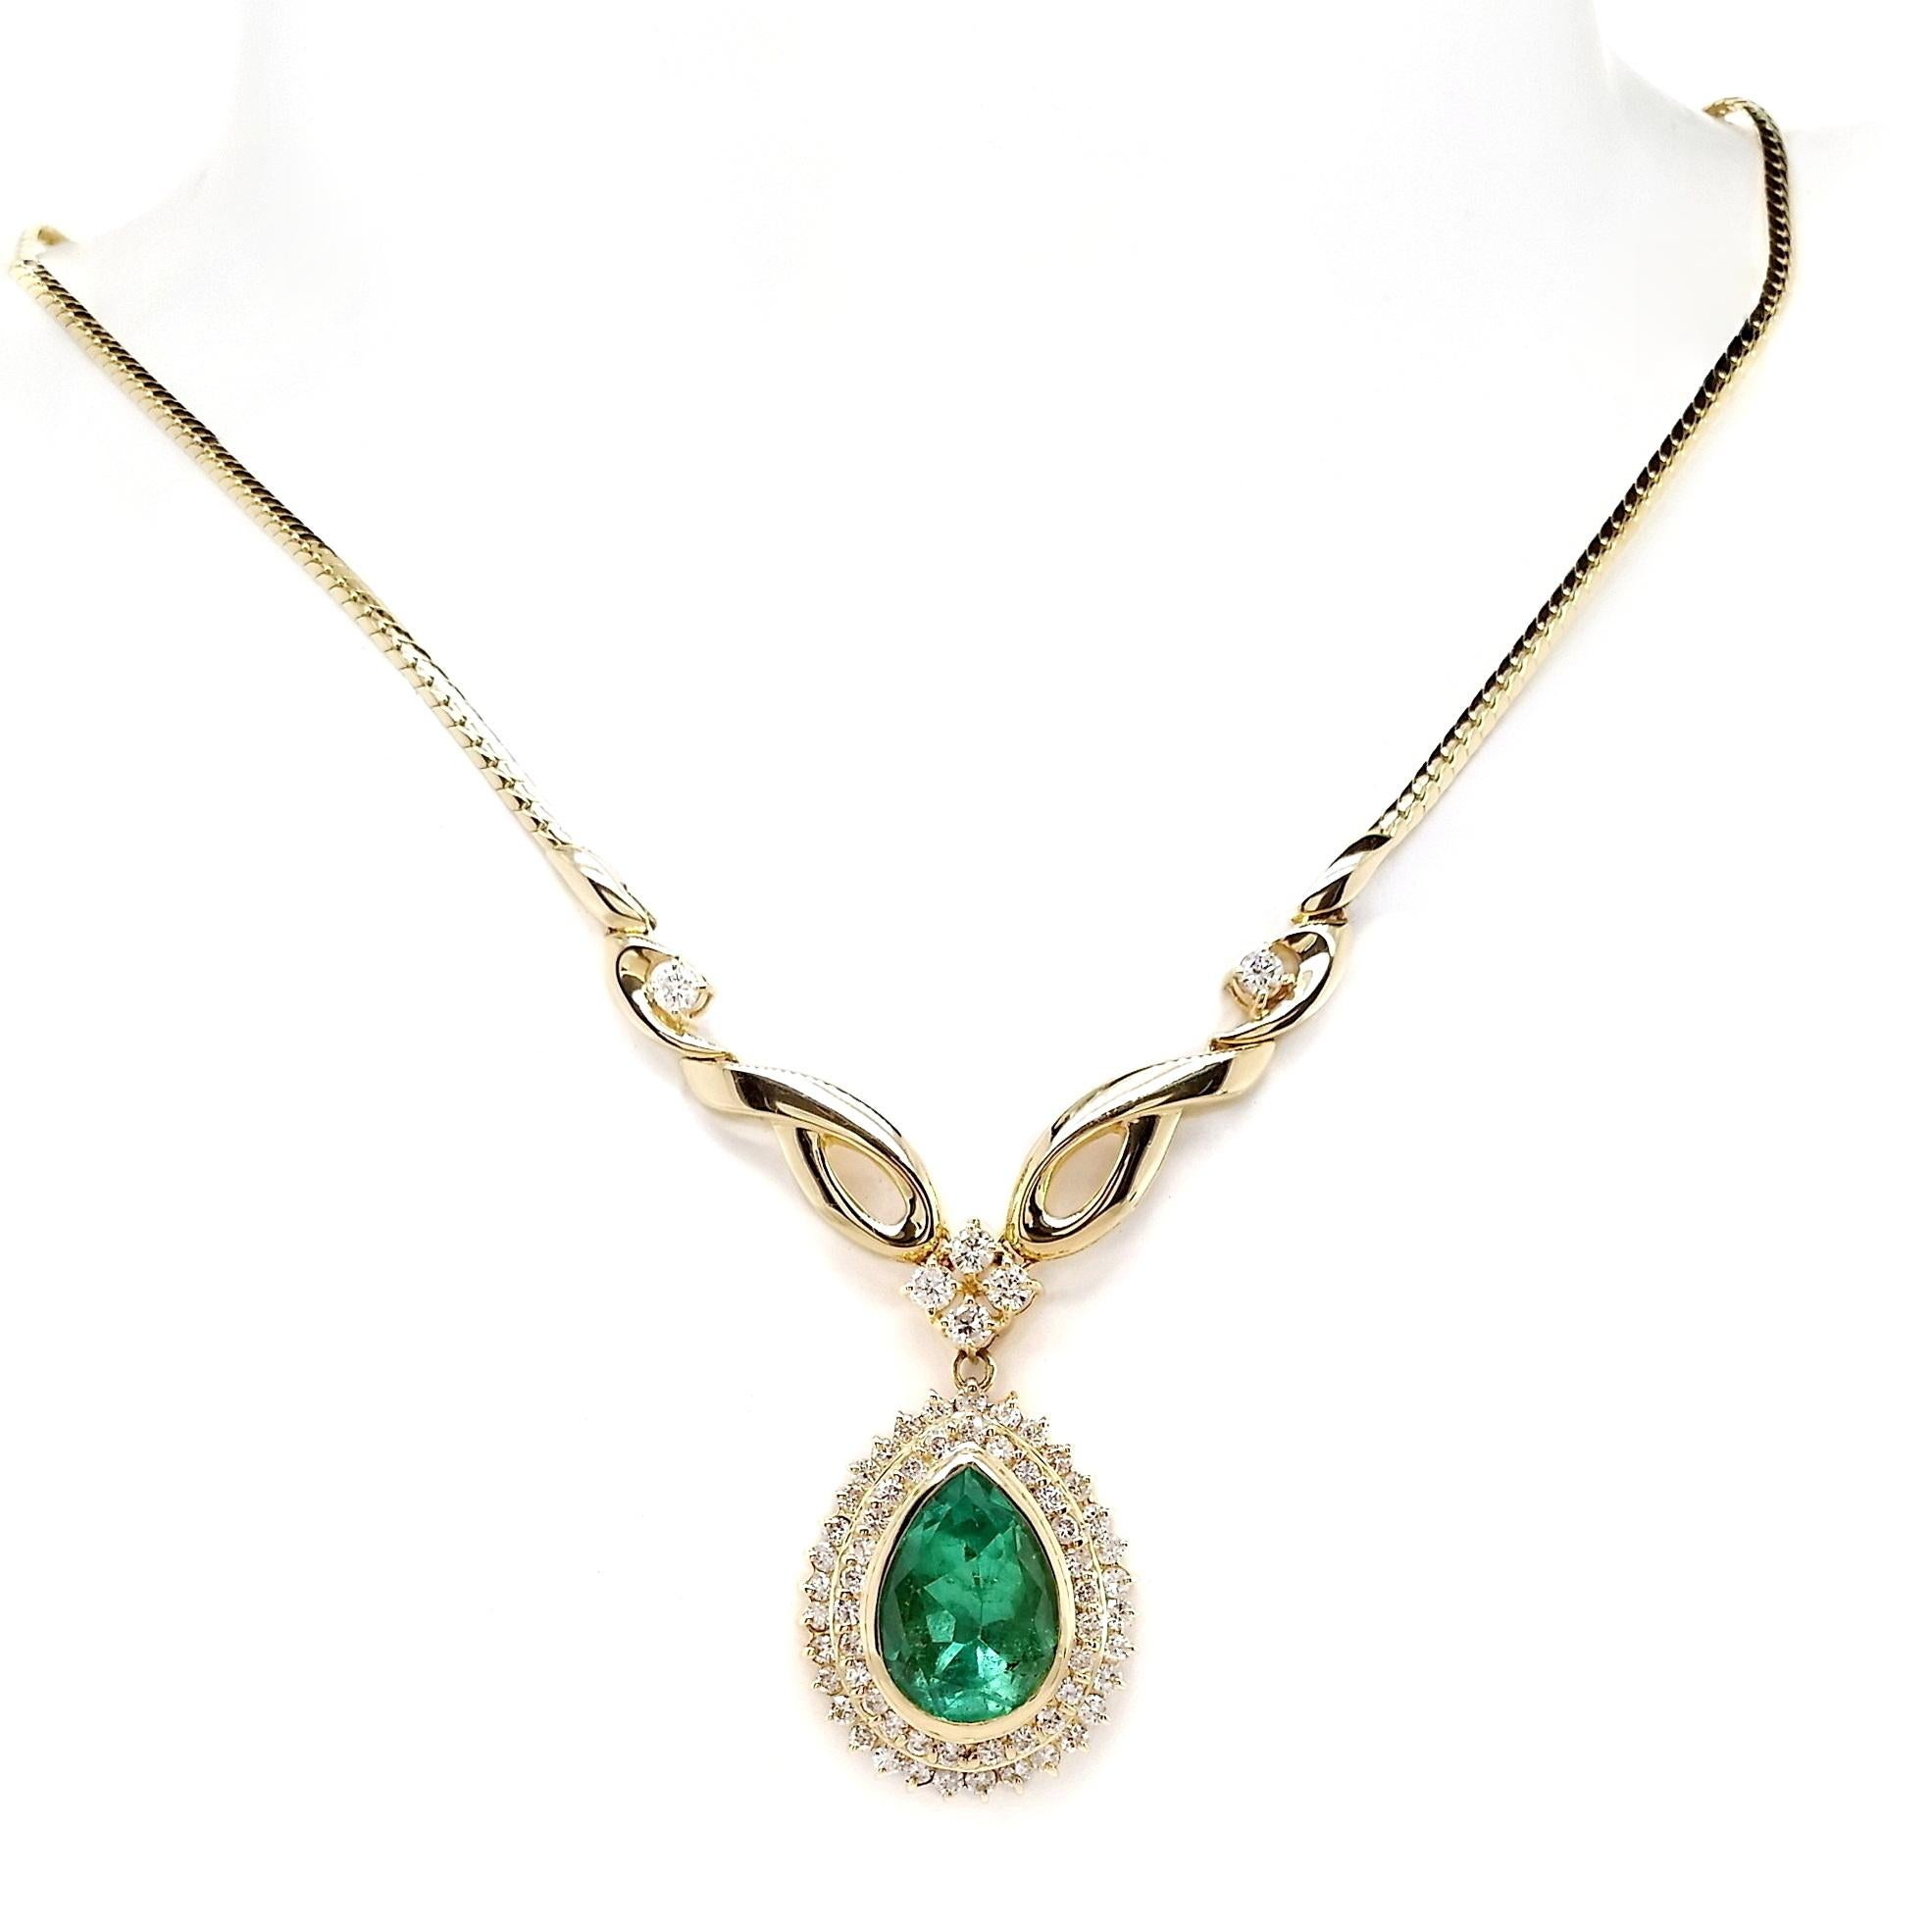 Pear Cut IGI Certified 5.14ct Colombia Emerald 1.46ct Diamonds 18K Yellow Gold Necklace